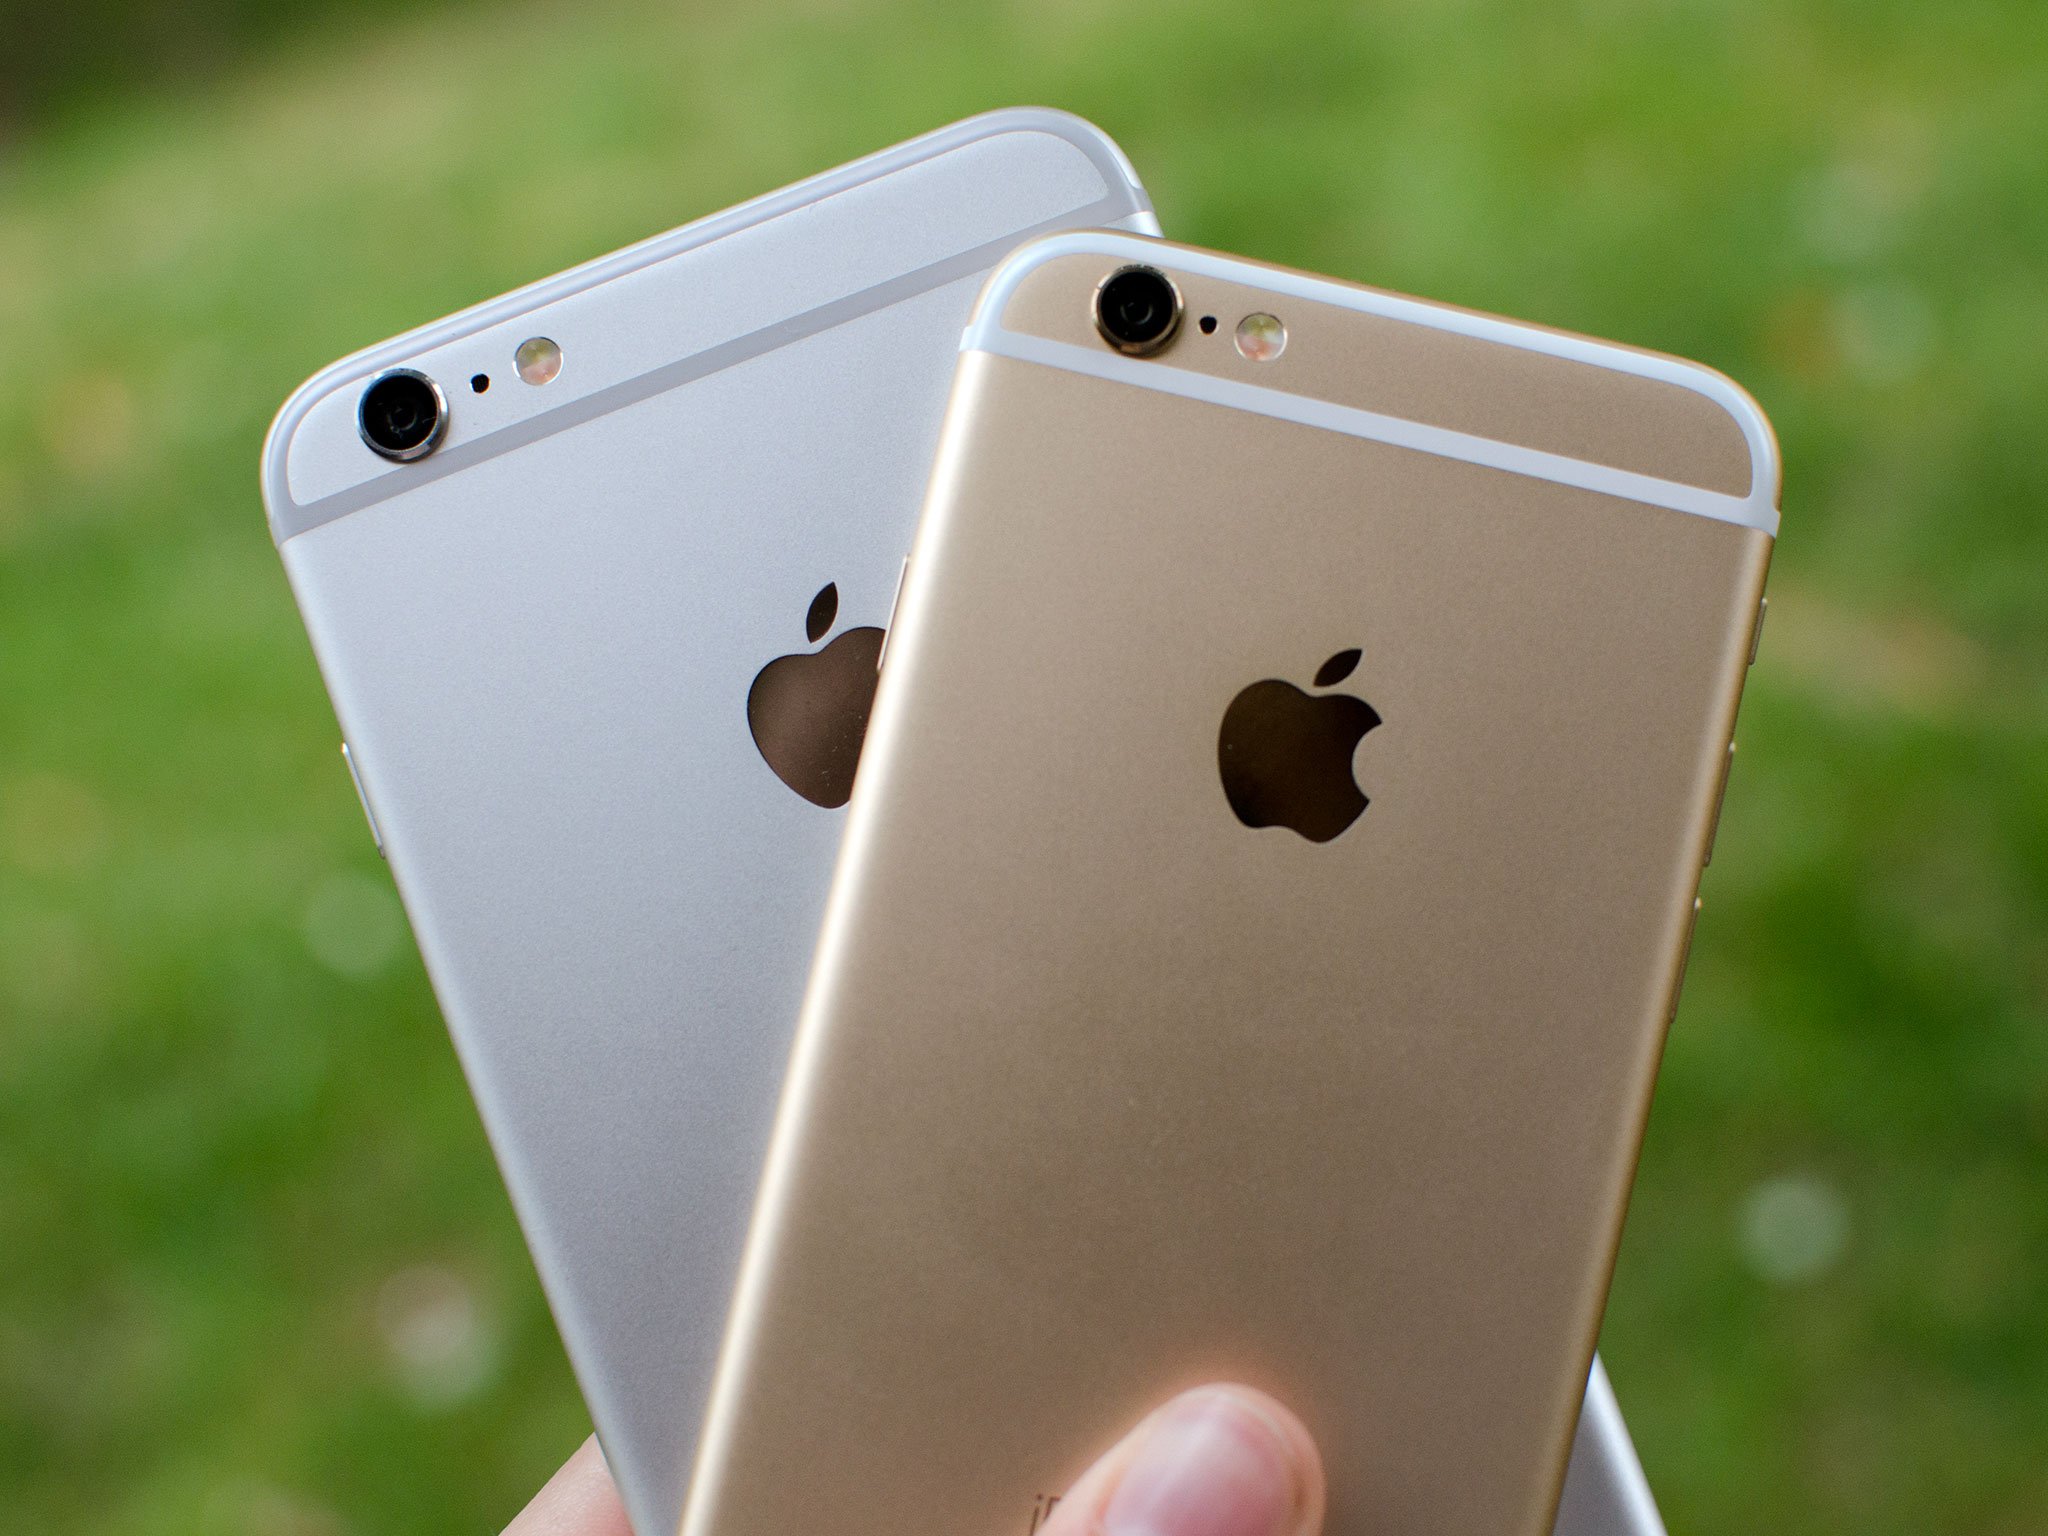 iPhone 6 vs iPhone 6 Plus camera comparison: Is the 6 Plus actually better?